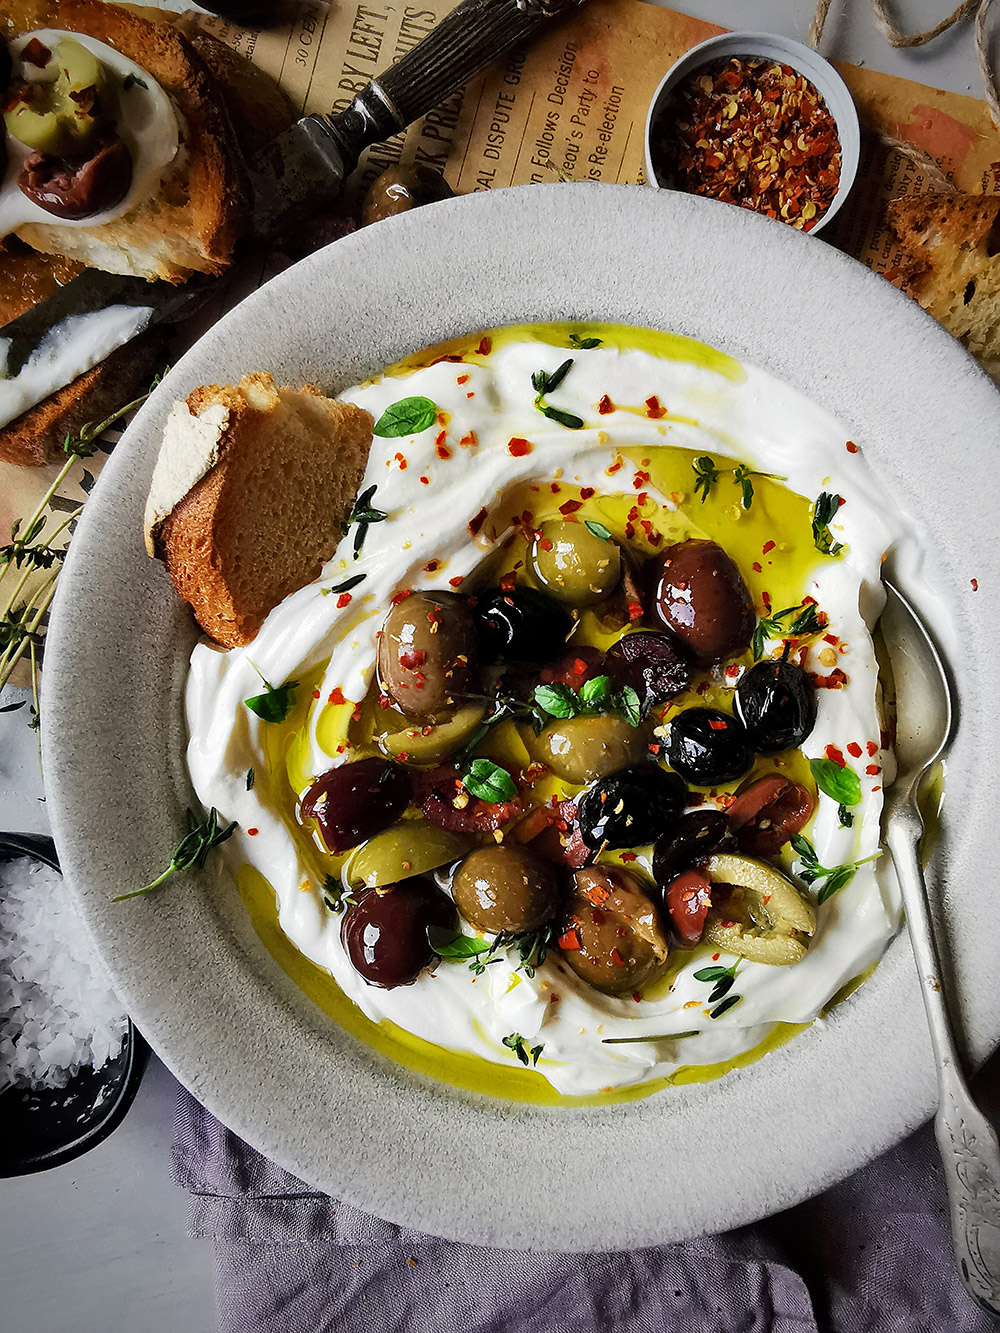 Creamy goat cheese labneh spread with olives